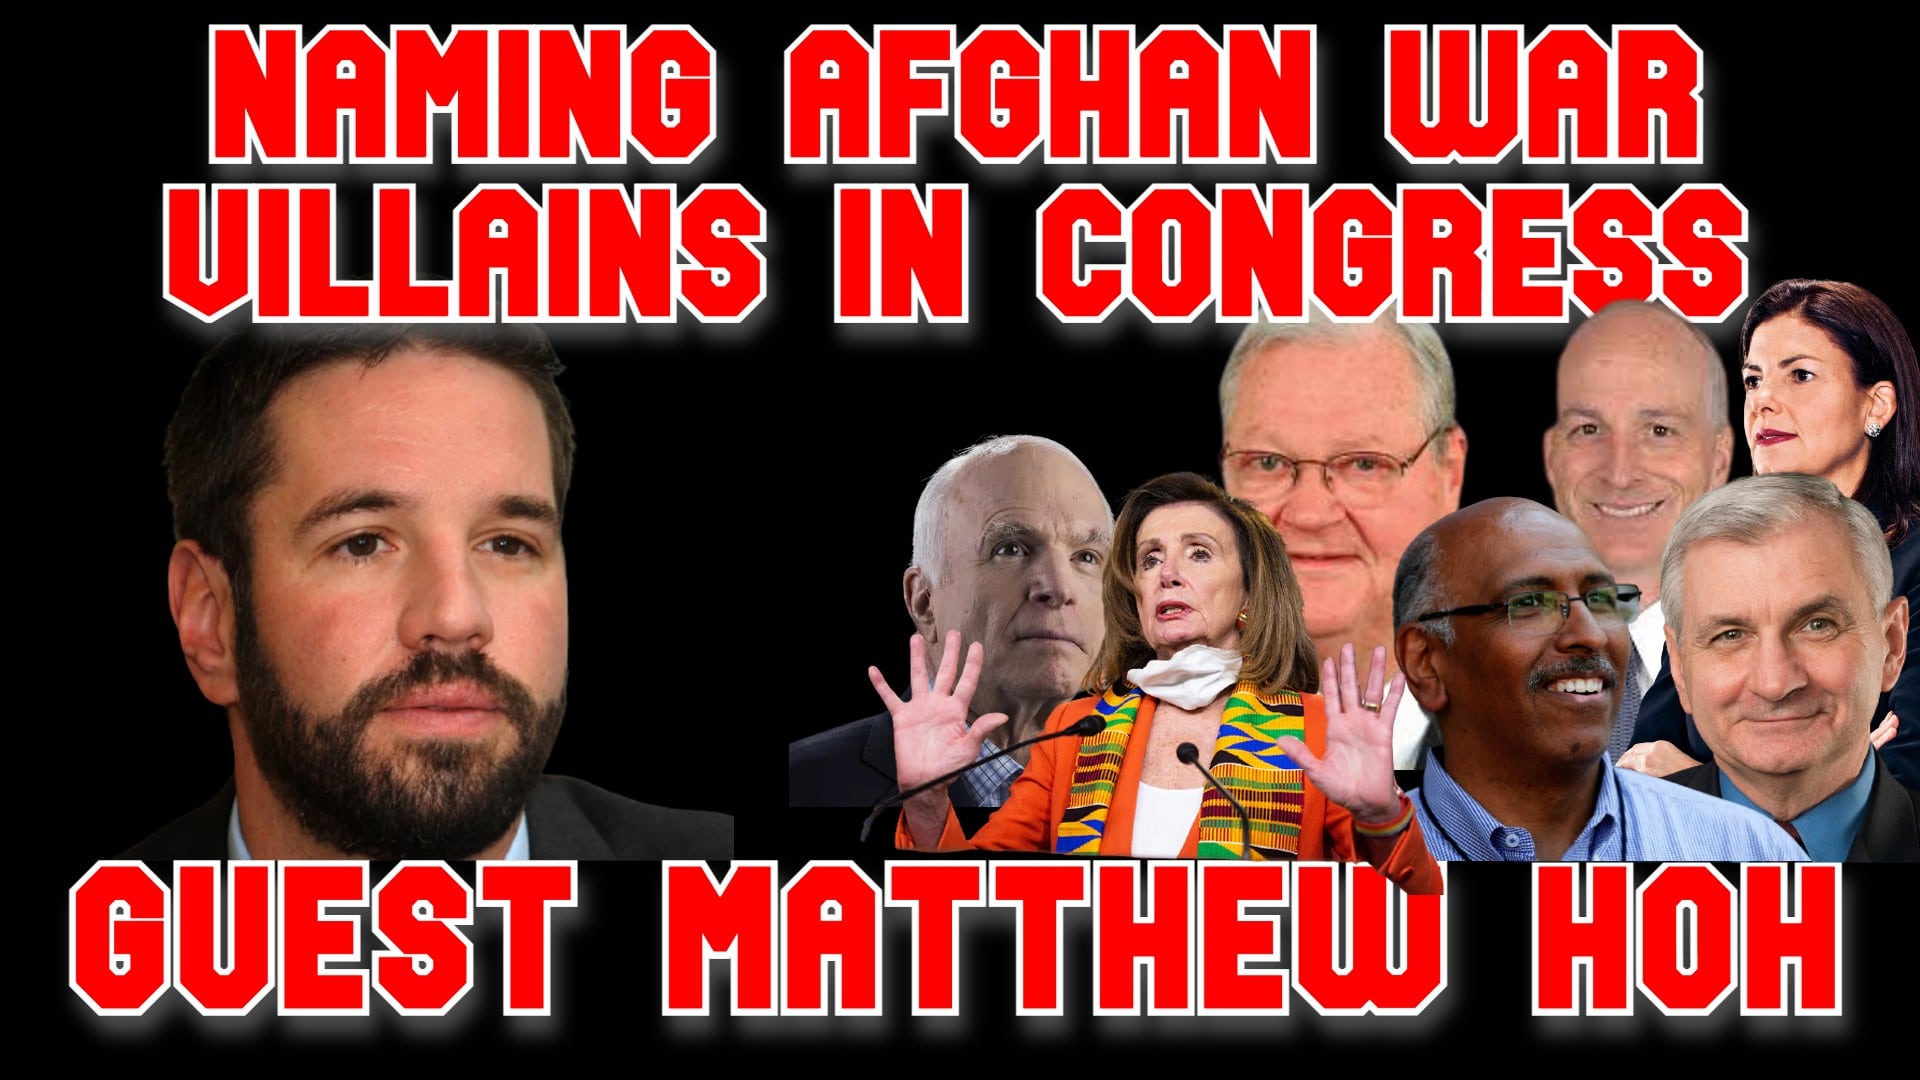 COI #163: Matthew Hoh Names the Reps. Most Responsible for the Afghan War Disaster